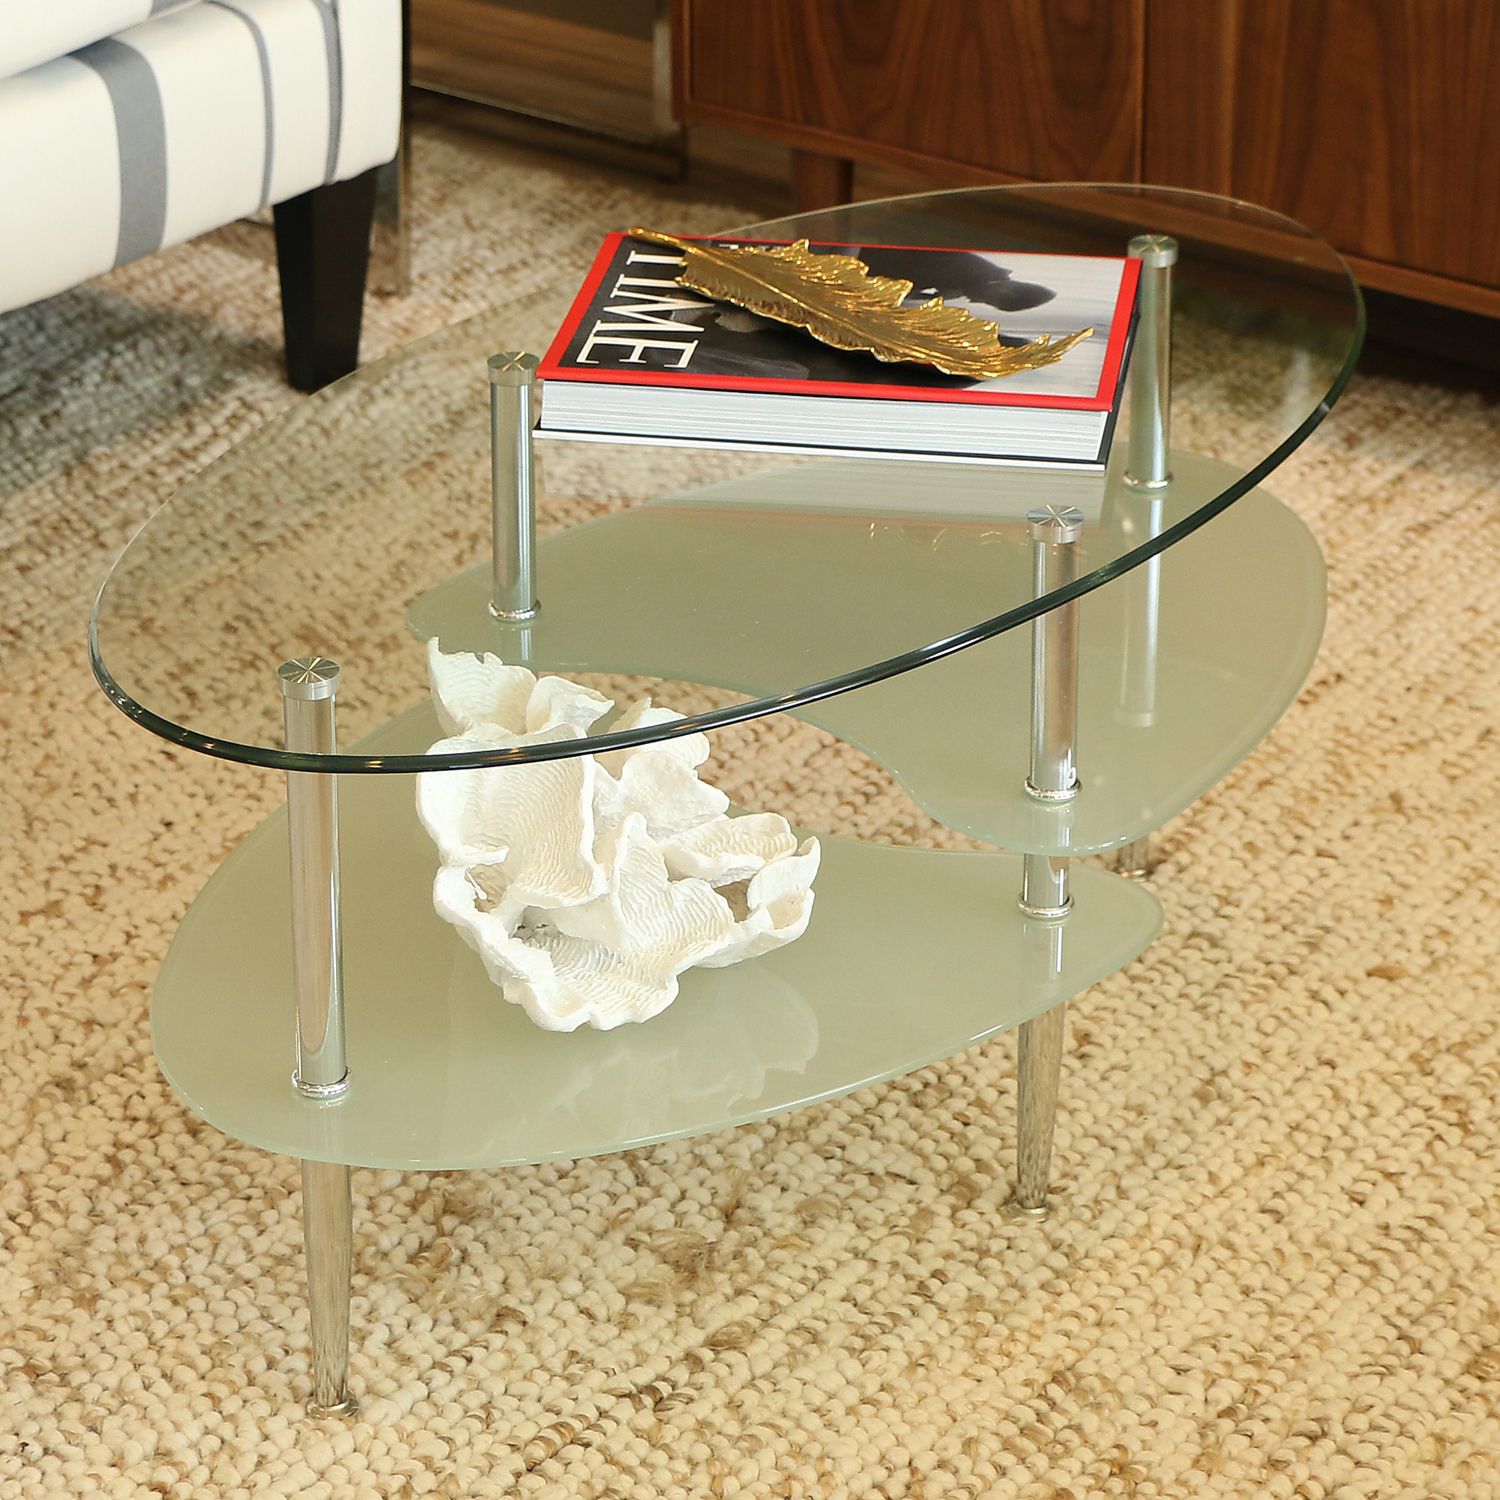 Oval Glass Coffee Table With Chrome Legs – Pier1 Imports Intended For Glass And Gold Oval Coffee Tables (View 6 of 15)